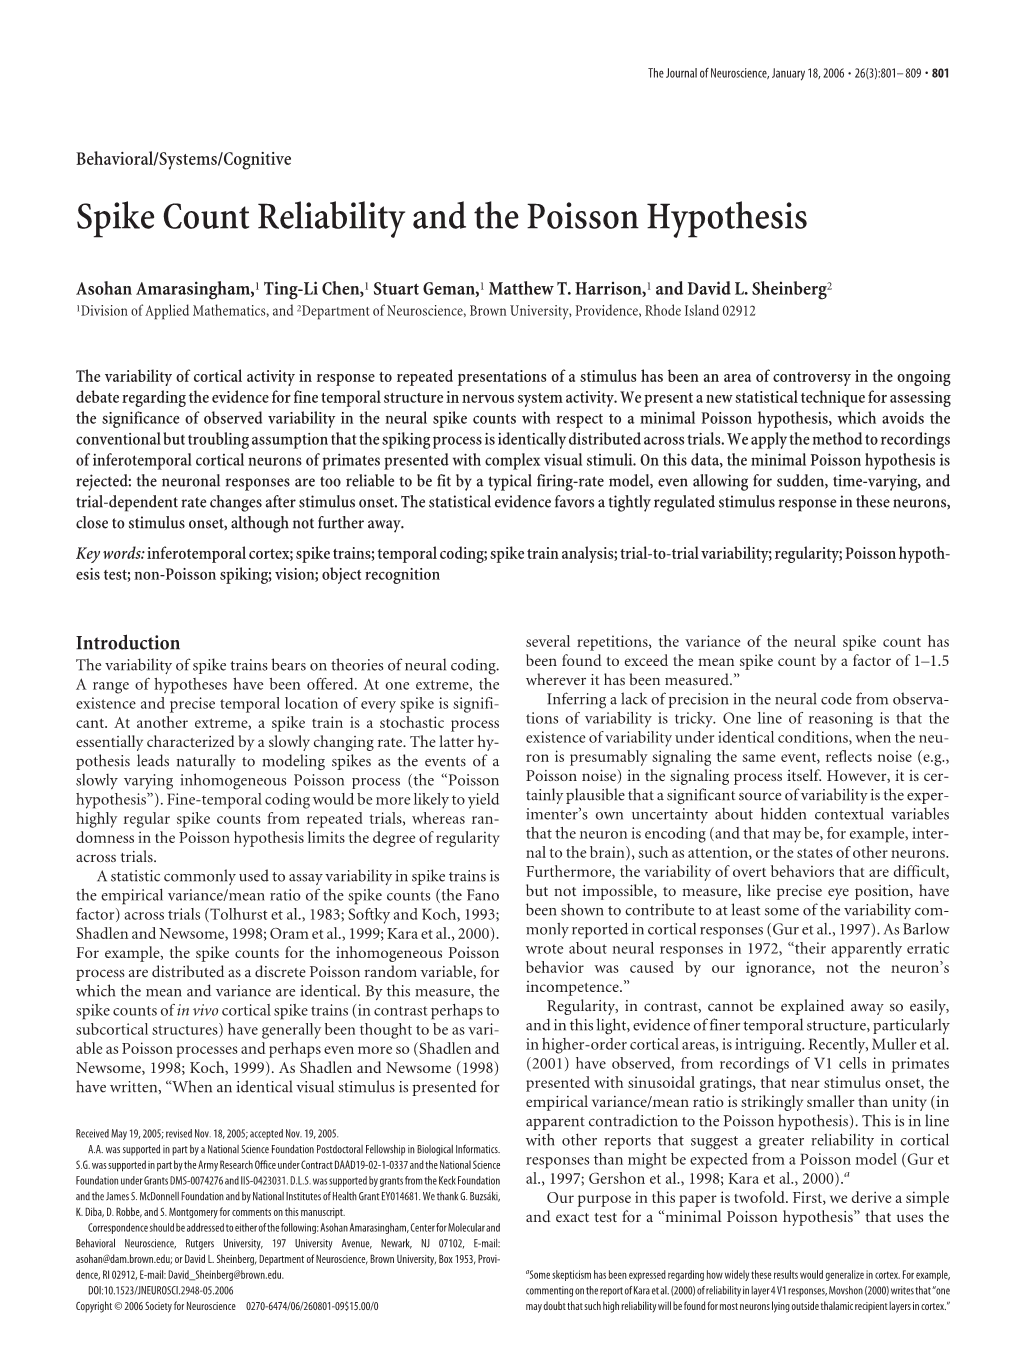 Spike Count Reliability and the Poisson Hypothesis